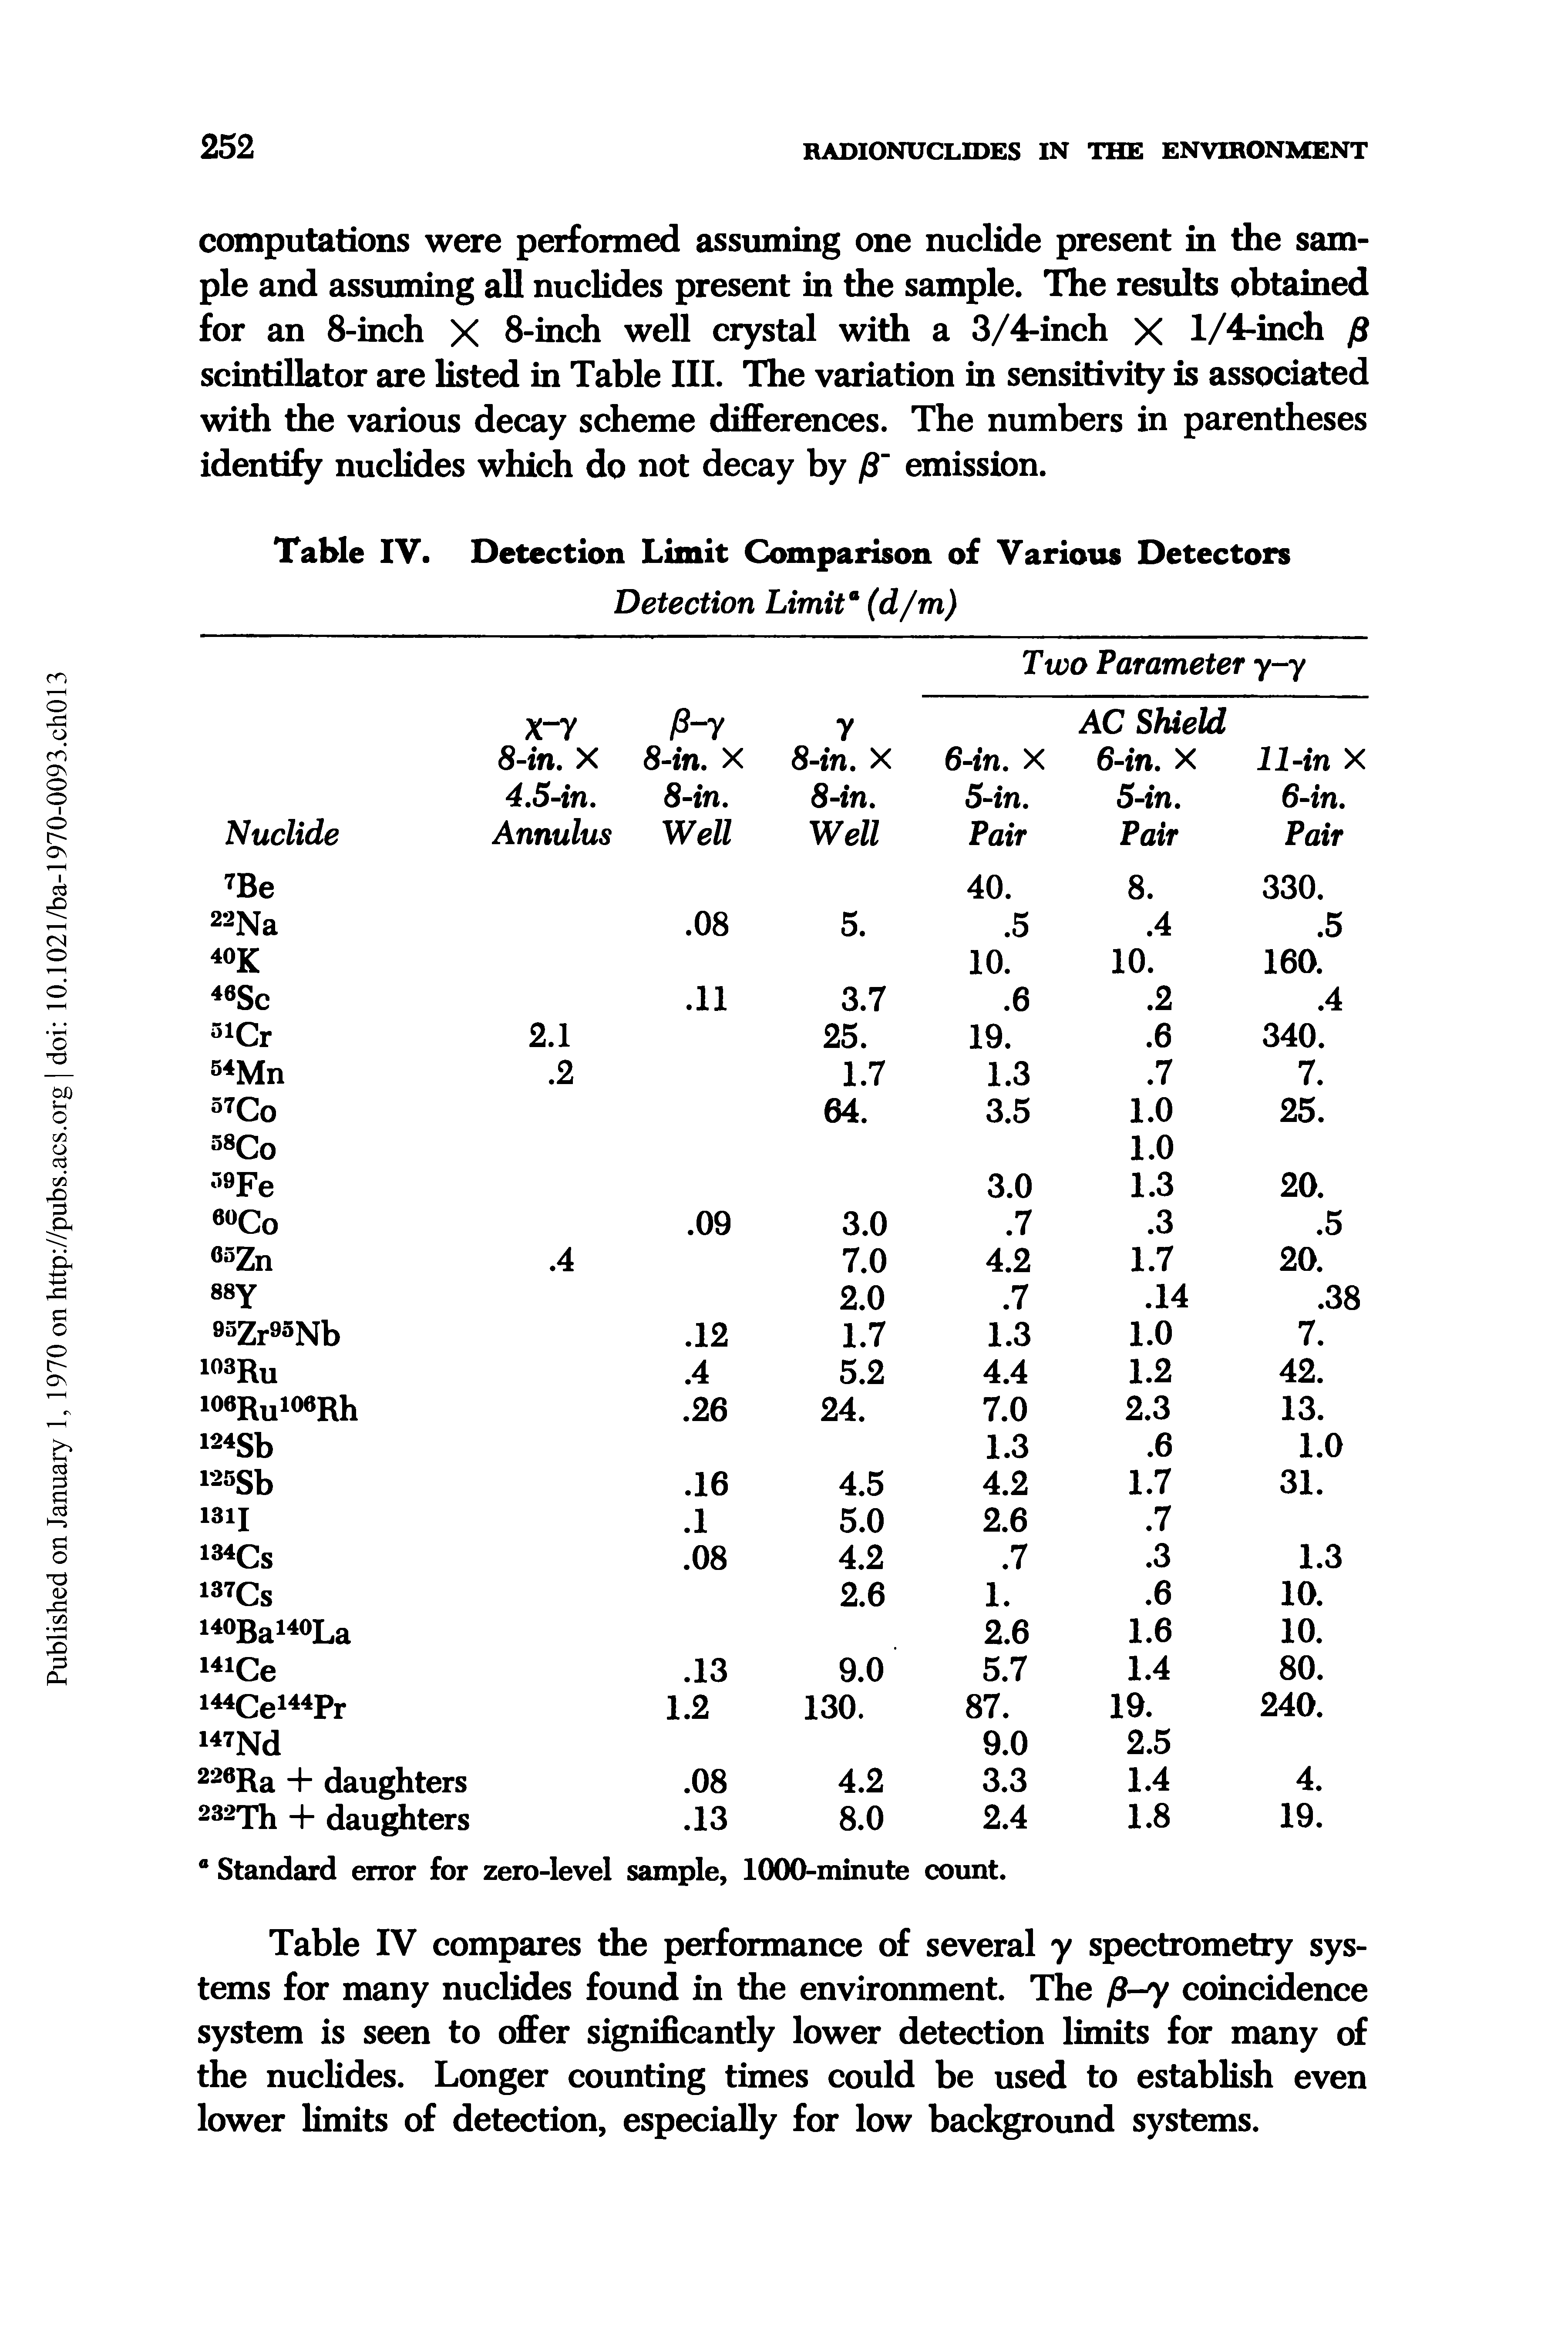 Table IV compares the performance of several y spectrometry systems for many nuclides found in the environment. The f -y coincidence system is seen to offer significantly lower detection limits for many of the nuclides. Longer counting times could be used to establish even lower limits of detection, especially for low background systems.